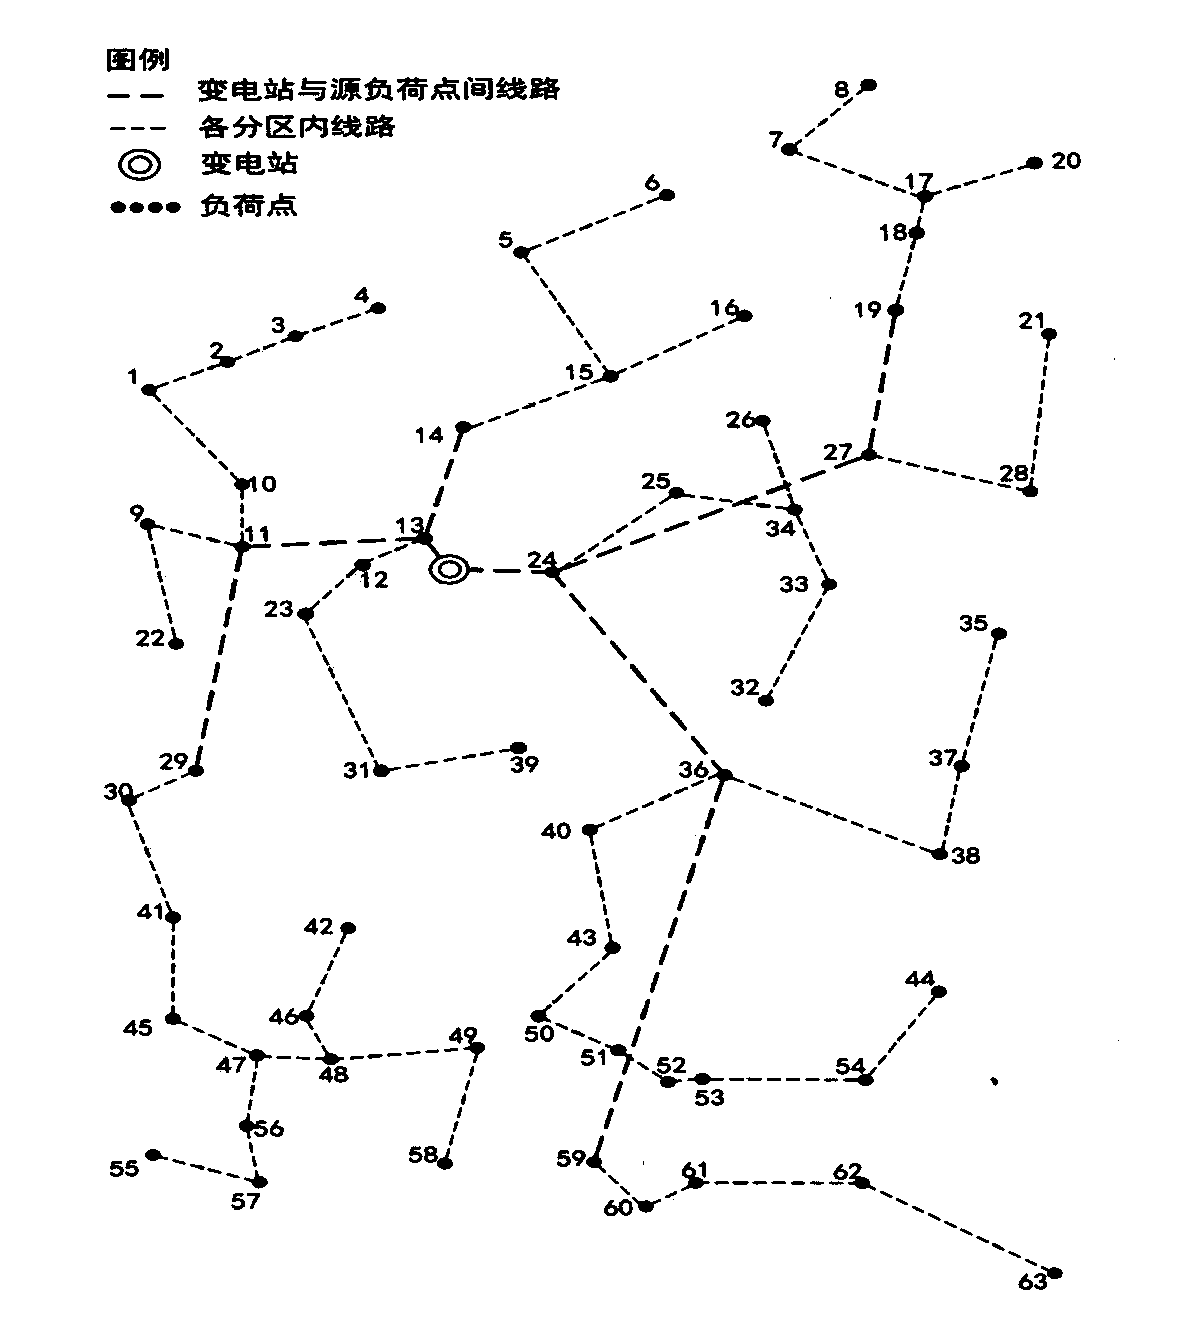 Distribution network frame planning method for conducting clustering and partitioning on basis of load points and considering geographical factors